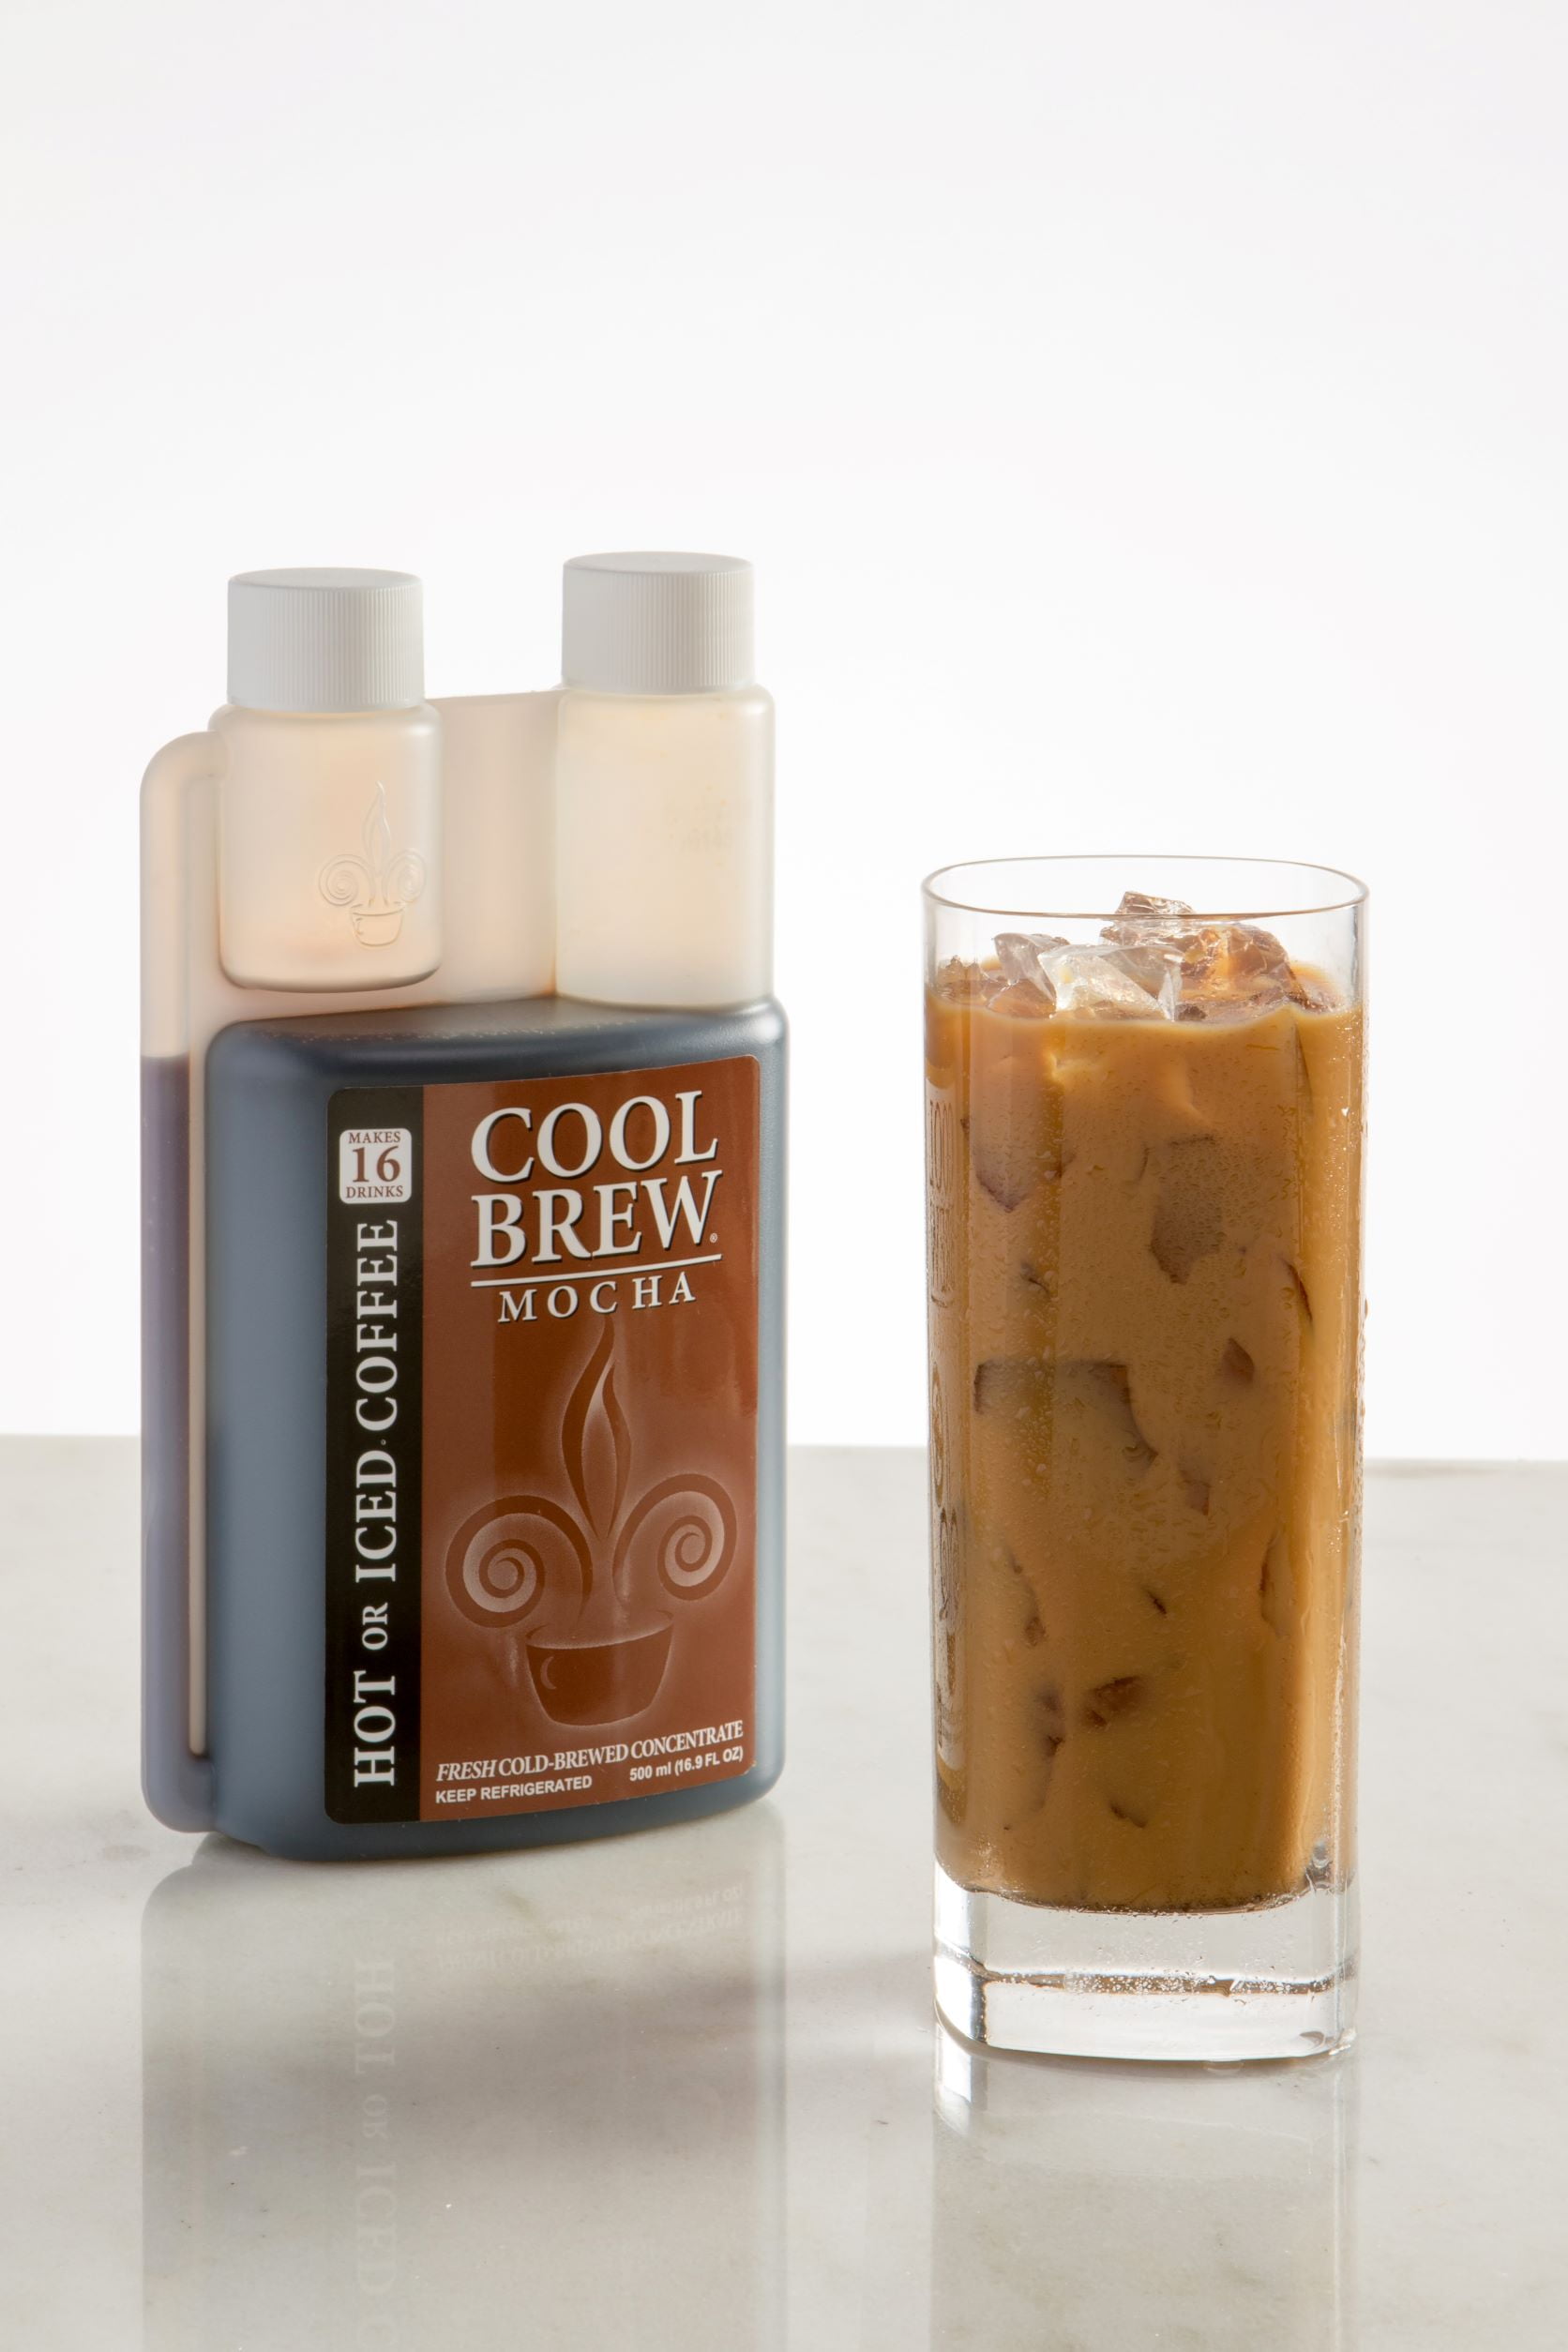 Cool Brew Toasted Almond Hot or Iced Coffee, 16.9 fl oz